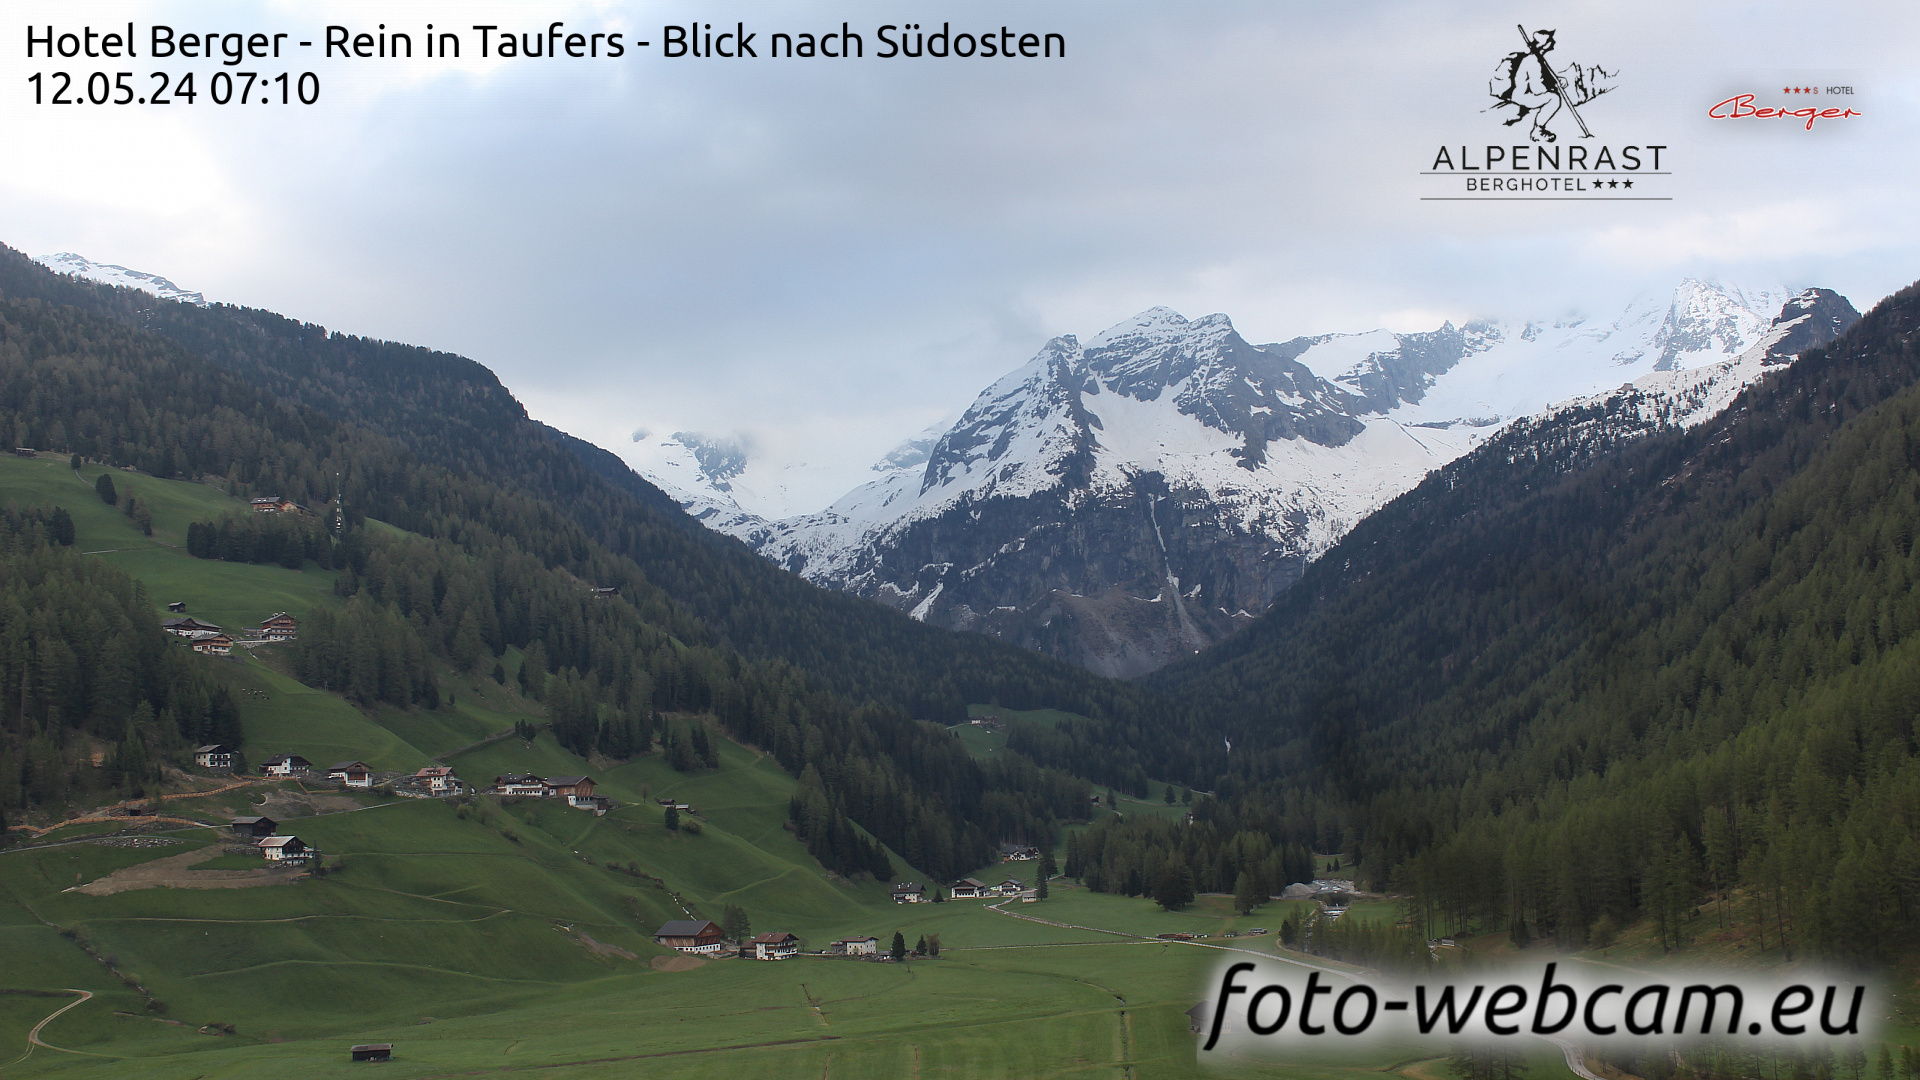 Rein in Taufers Do. 07:11